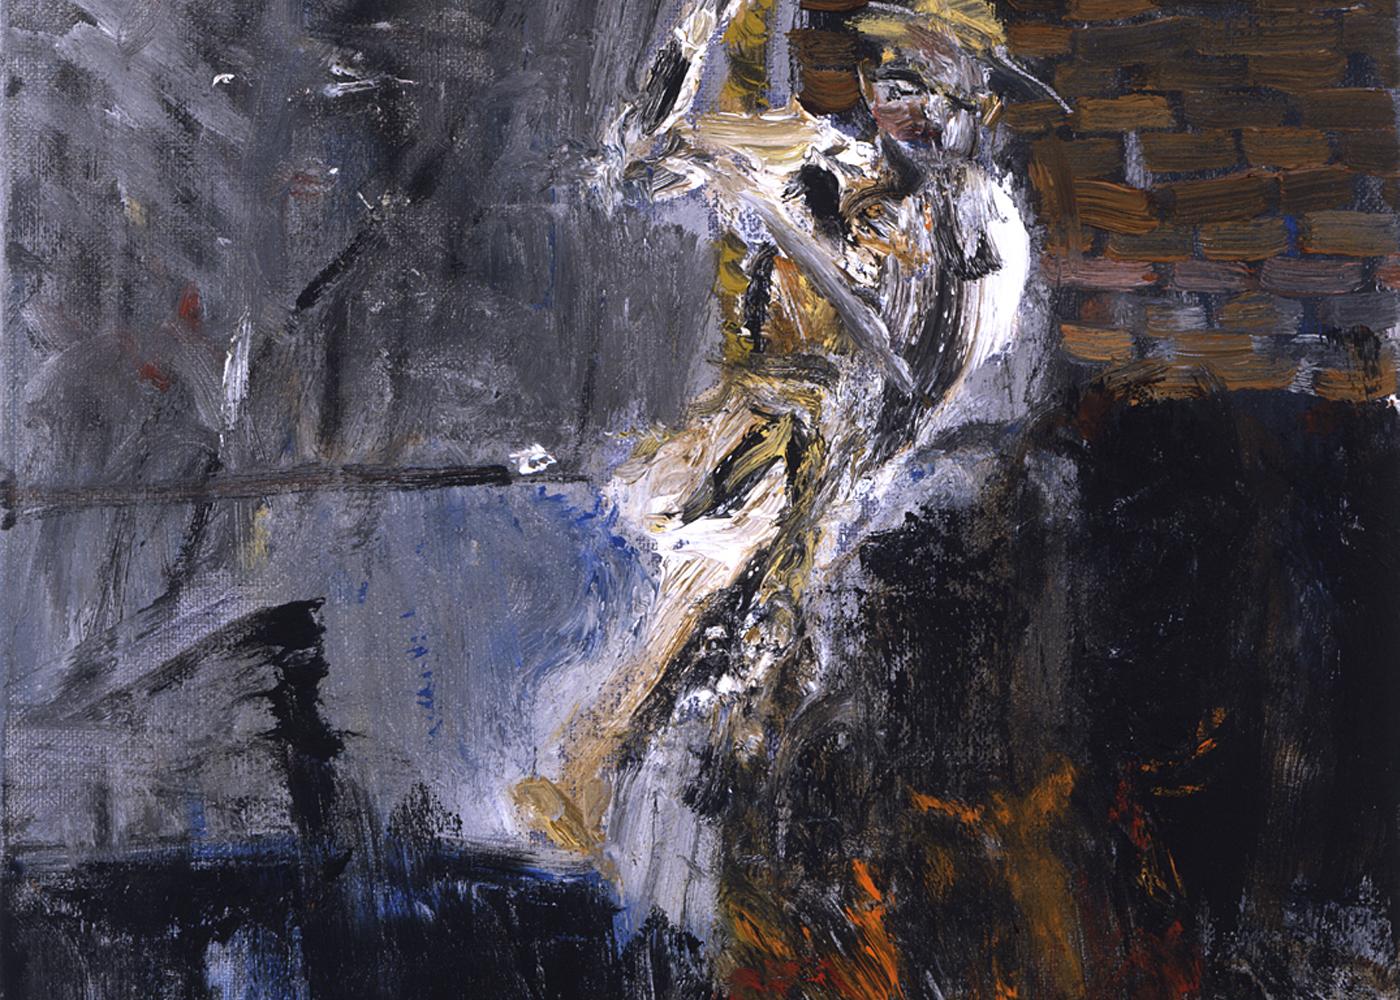 Escape. War painting, man trying to escape, tunnel, Holocaust related – Painting von Michael Hafftka